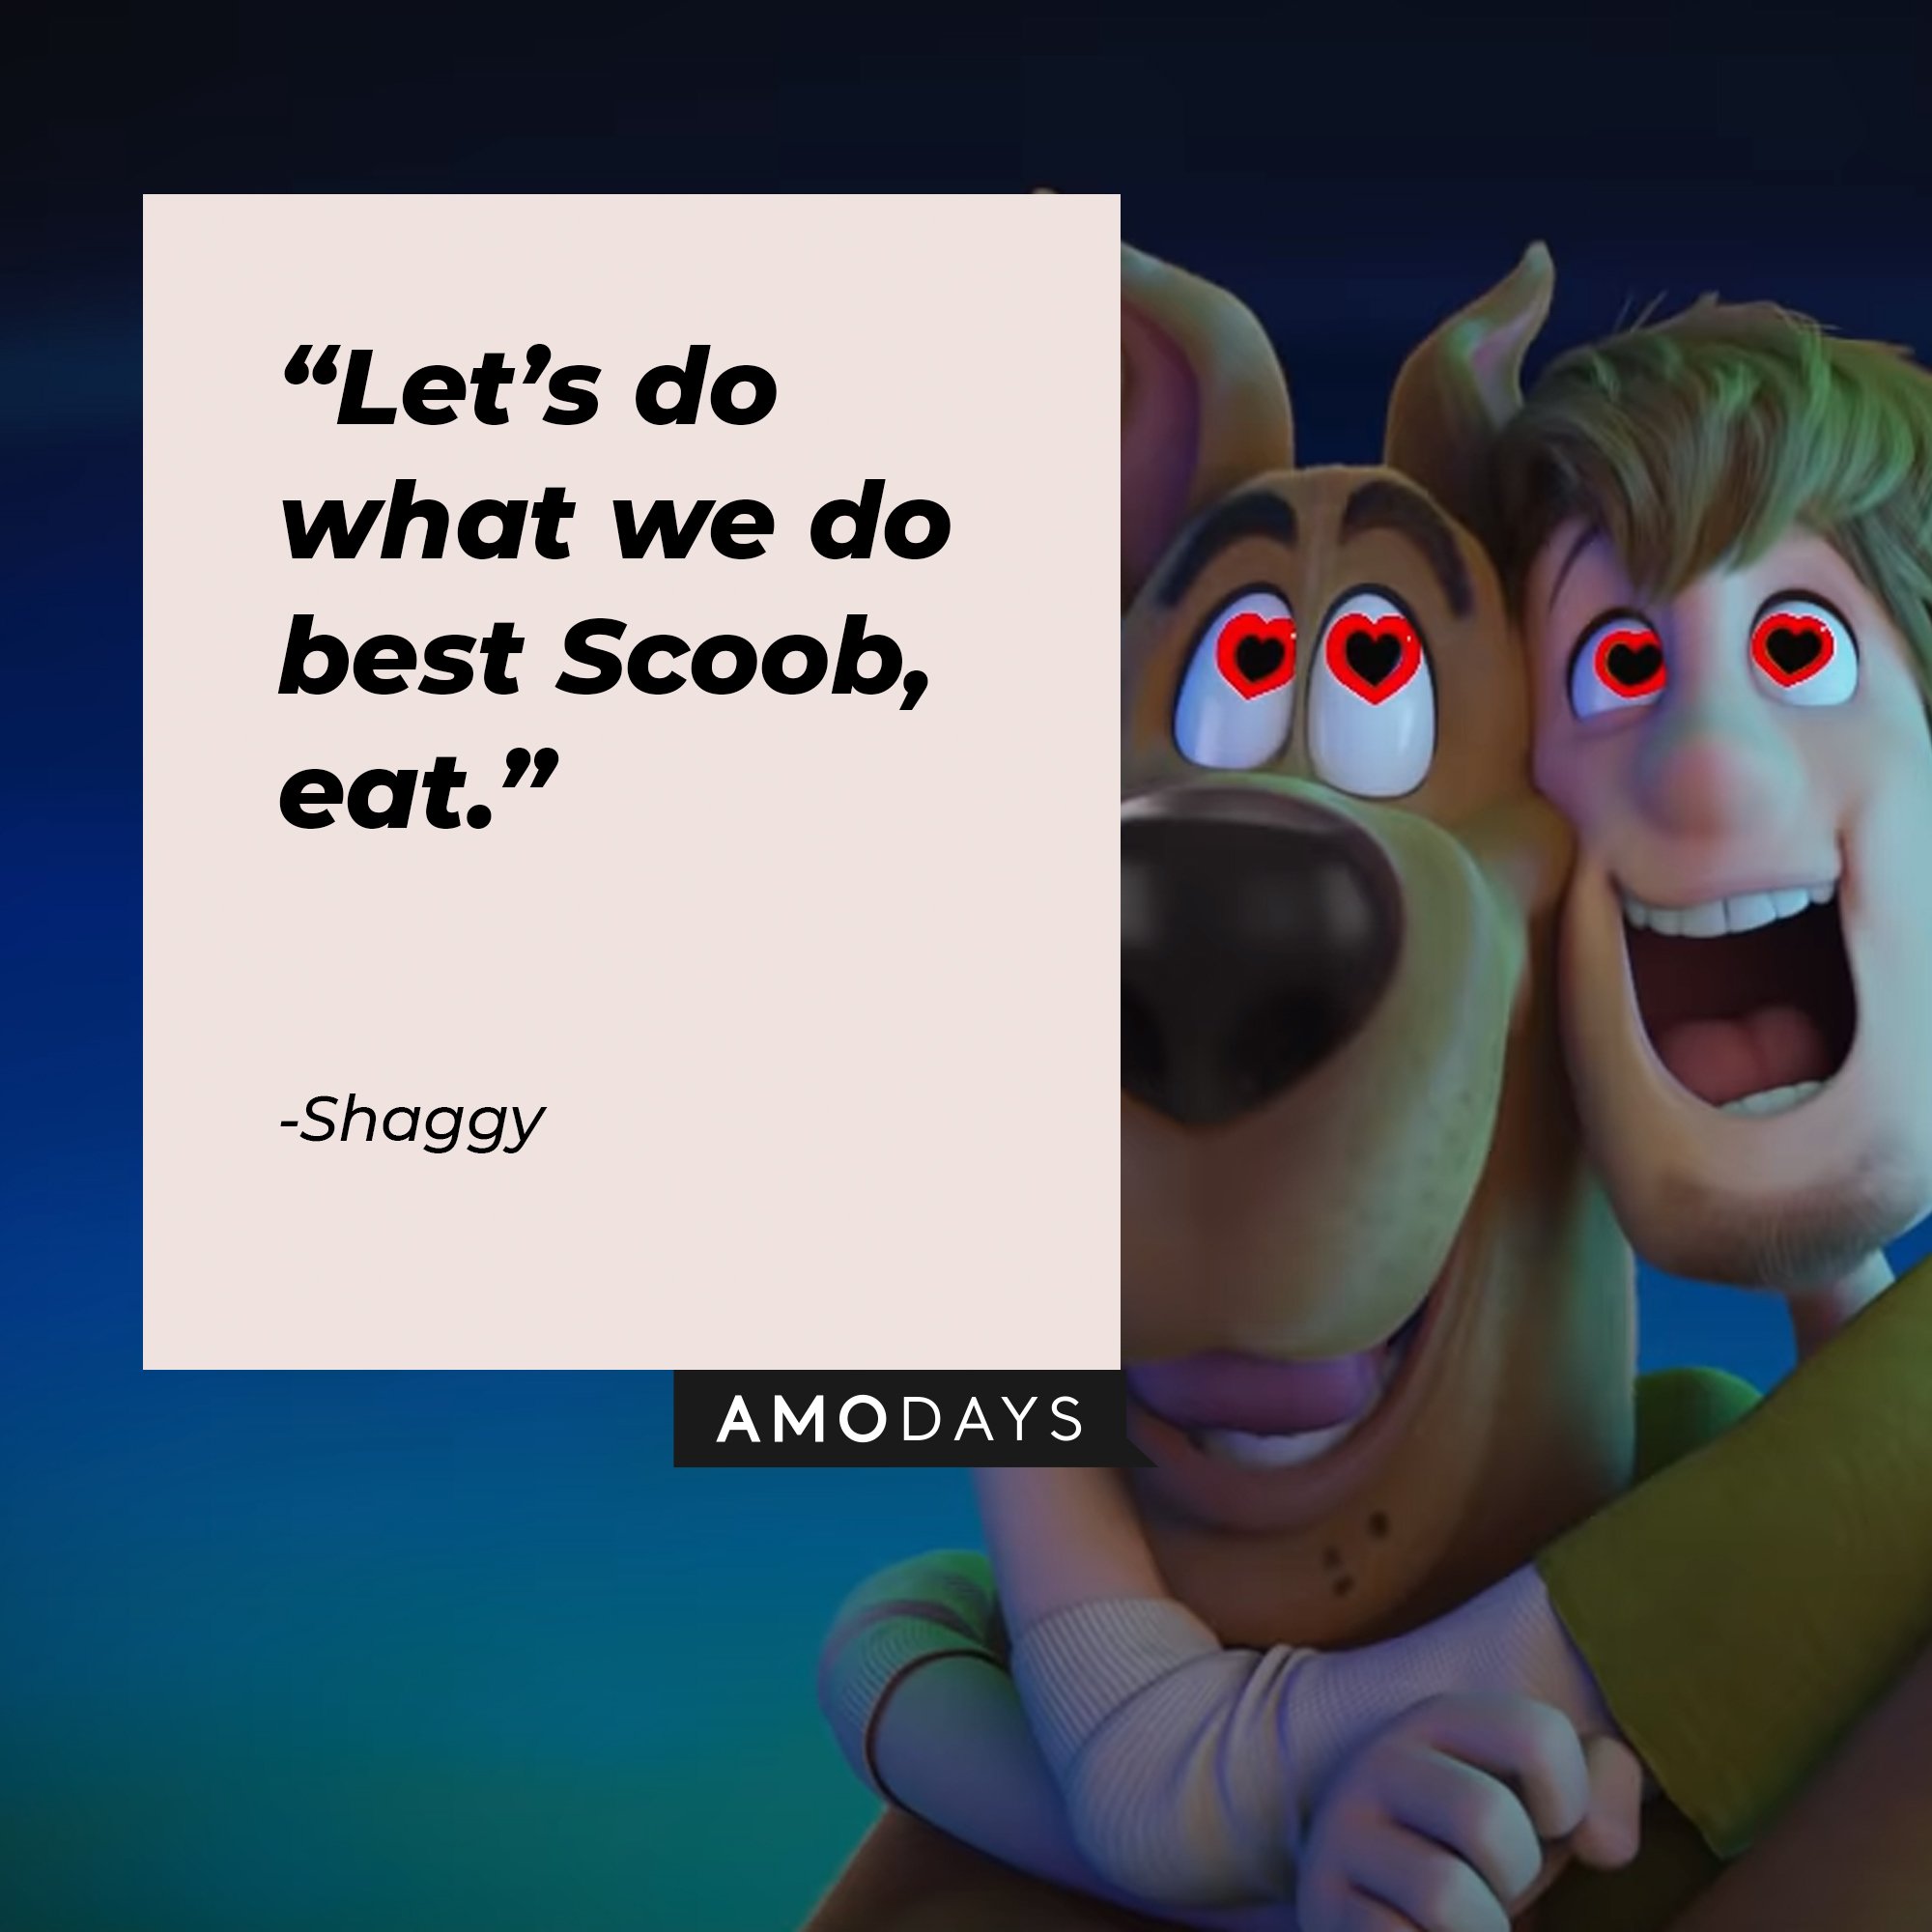  Shaggy: “Let’s do what we do best Scoob, eat.” | Image: AmoDays